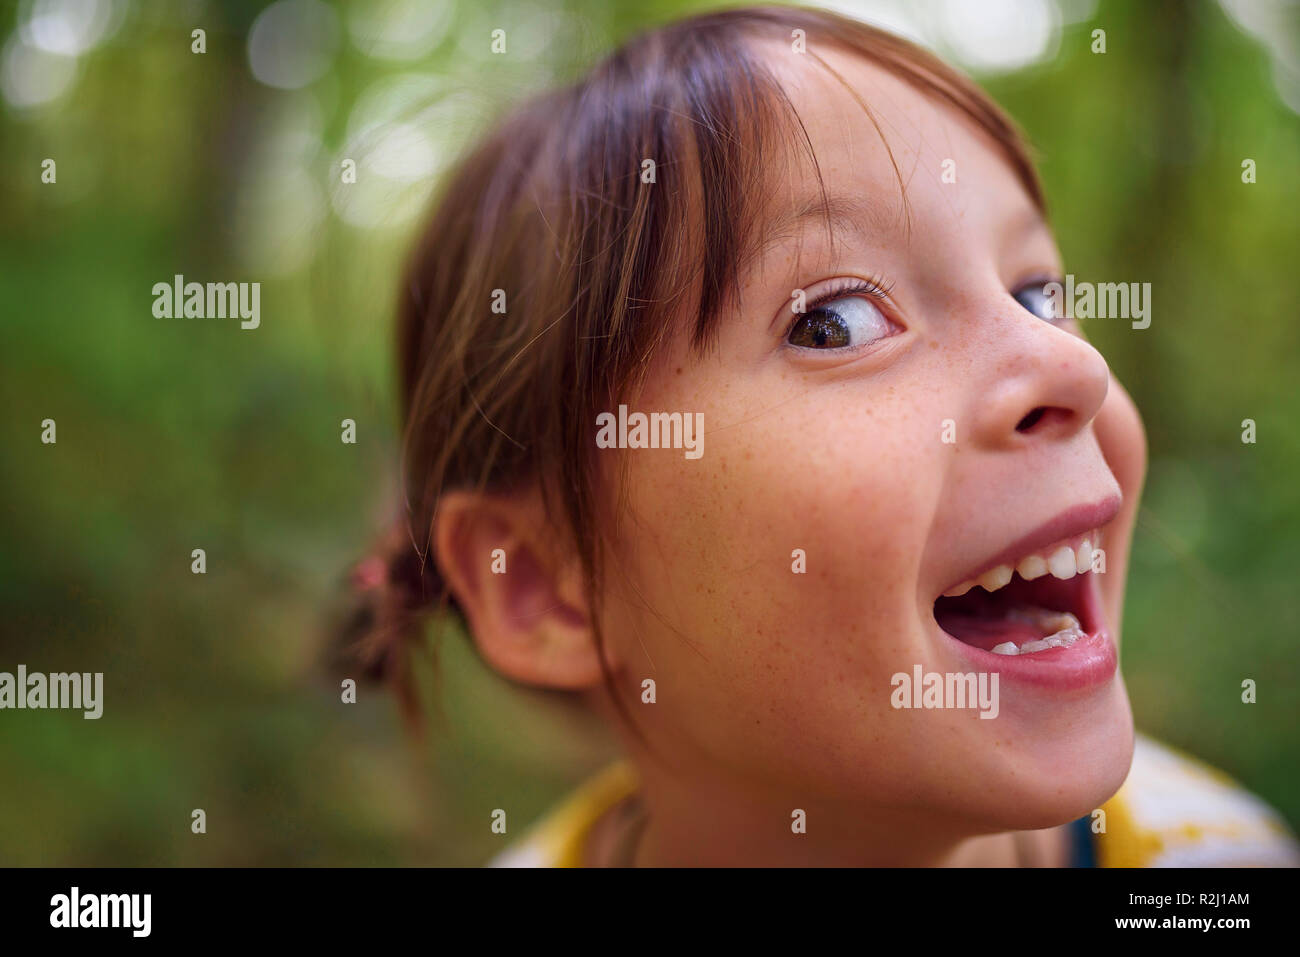 Portrait of a smiling Girl standing outdoors pulling funny faces, United States Banque D'Images